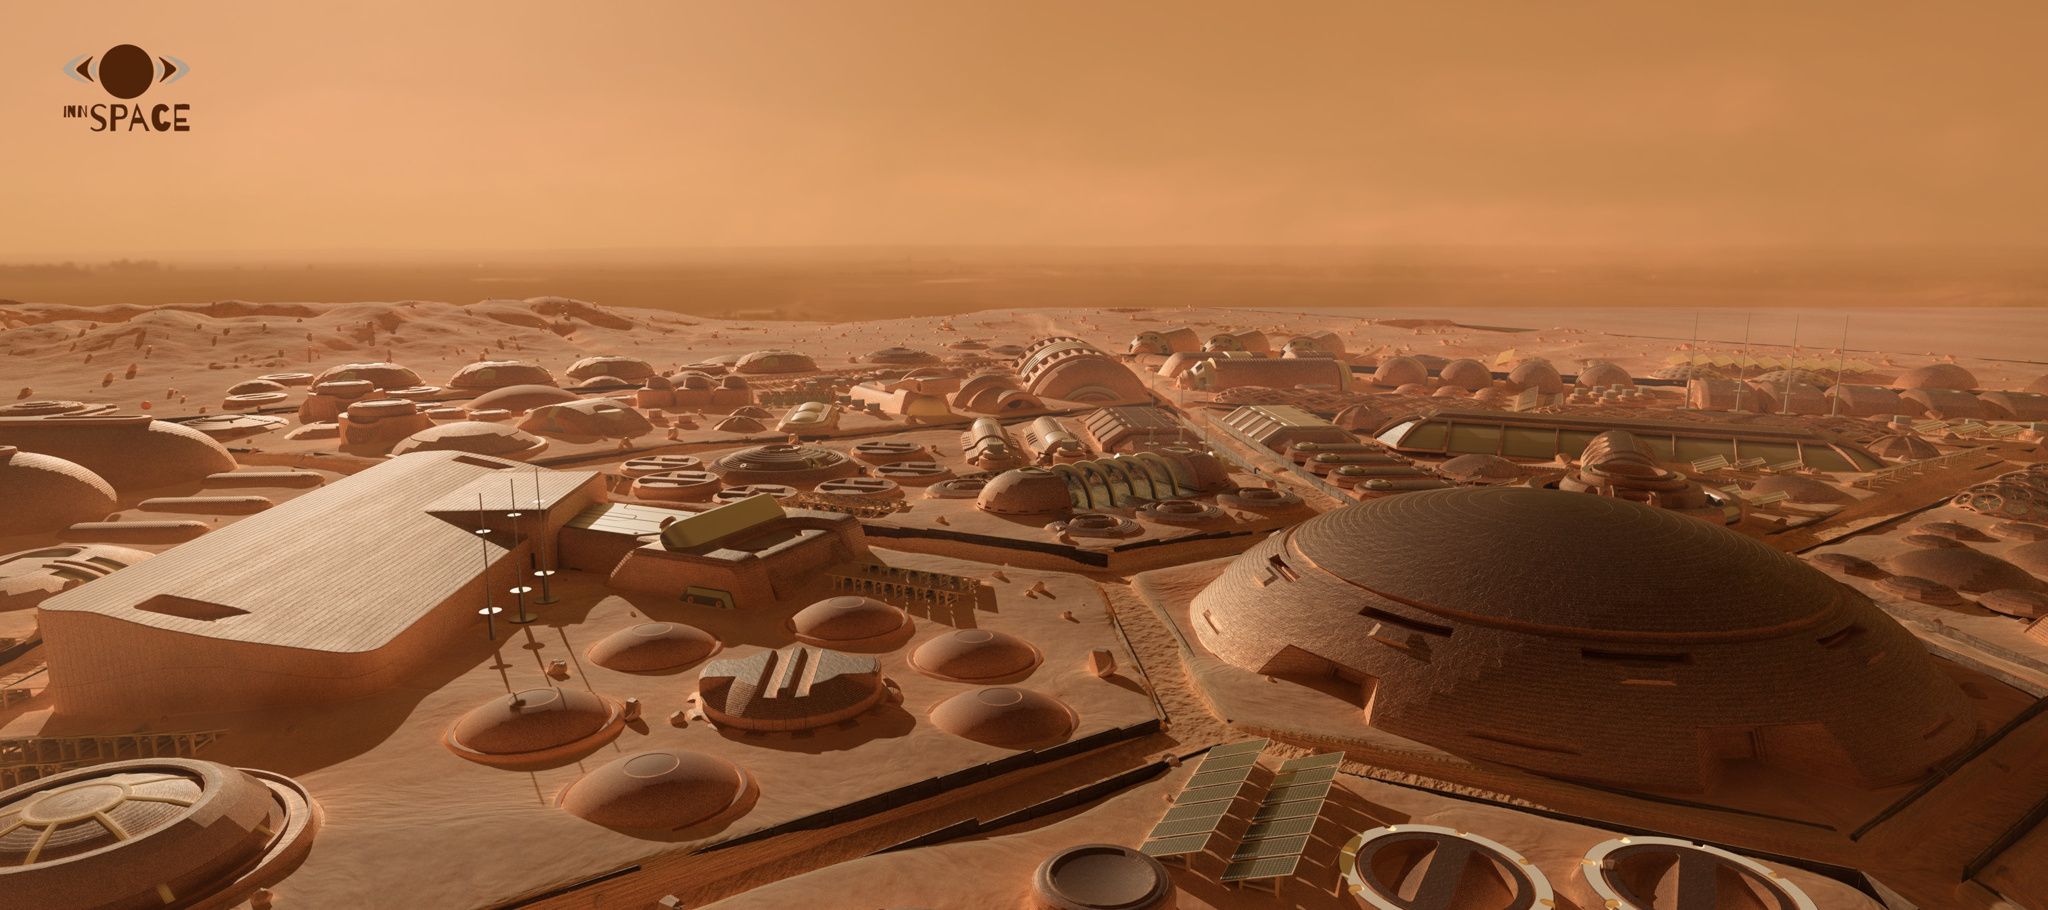 Mars colony for 1000 people by Innspace team (Mars Colony Prize contest)